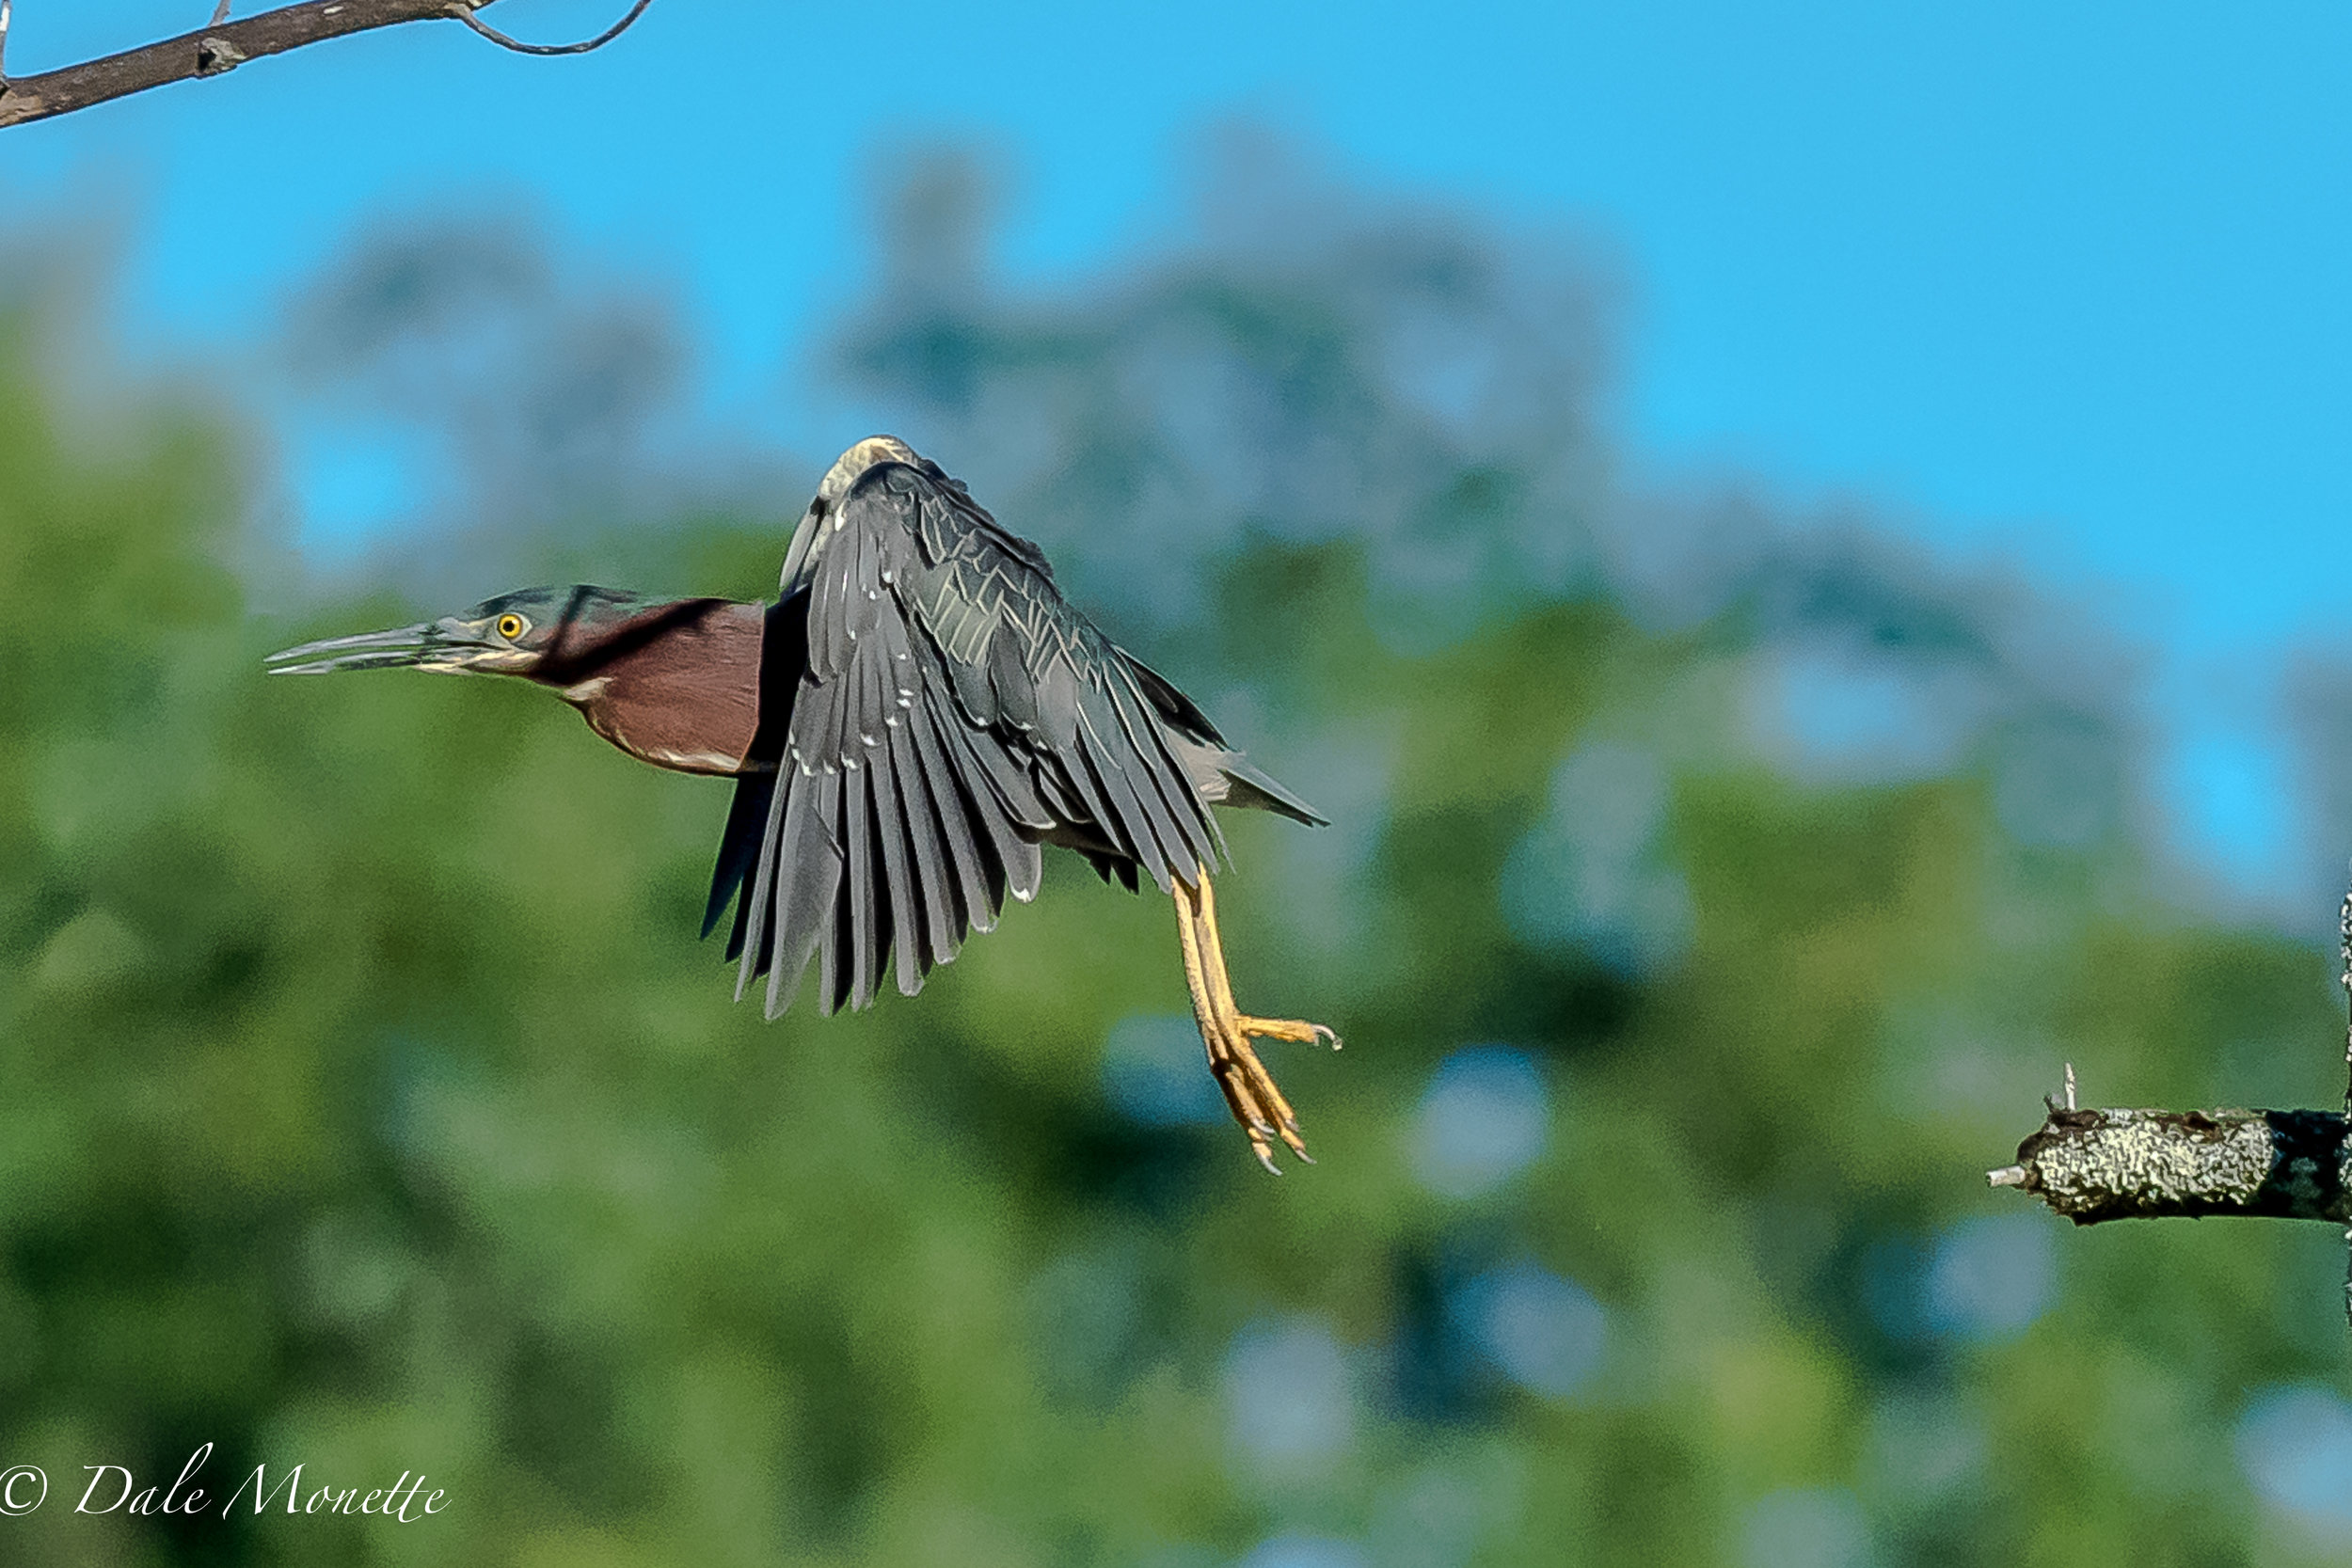   I was watching this green heron when all of a sudden he turned around fast and leaped off his branch and disappeared. &nbsp;7/26/17  